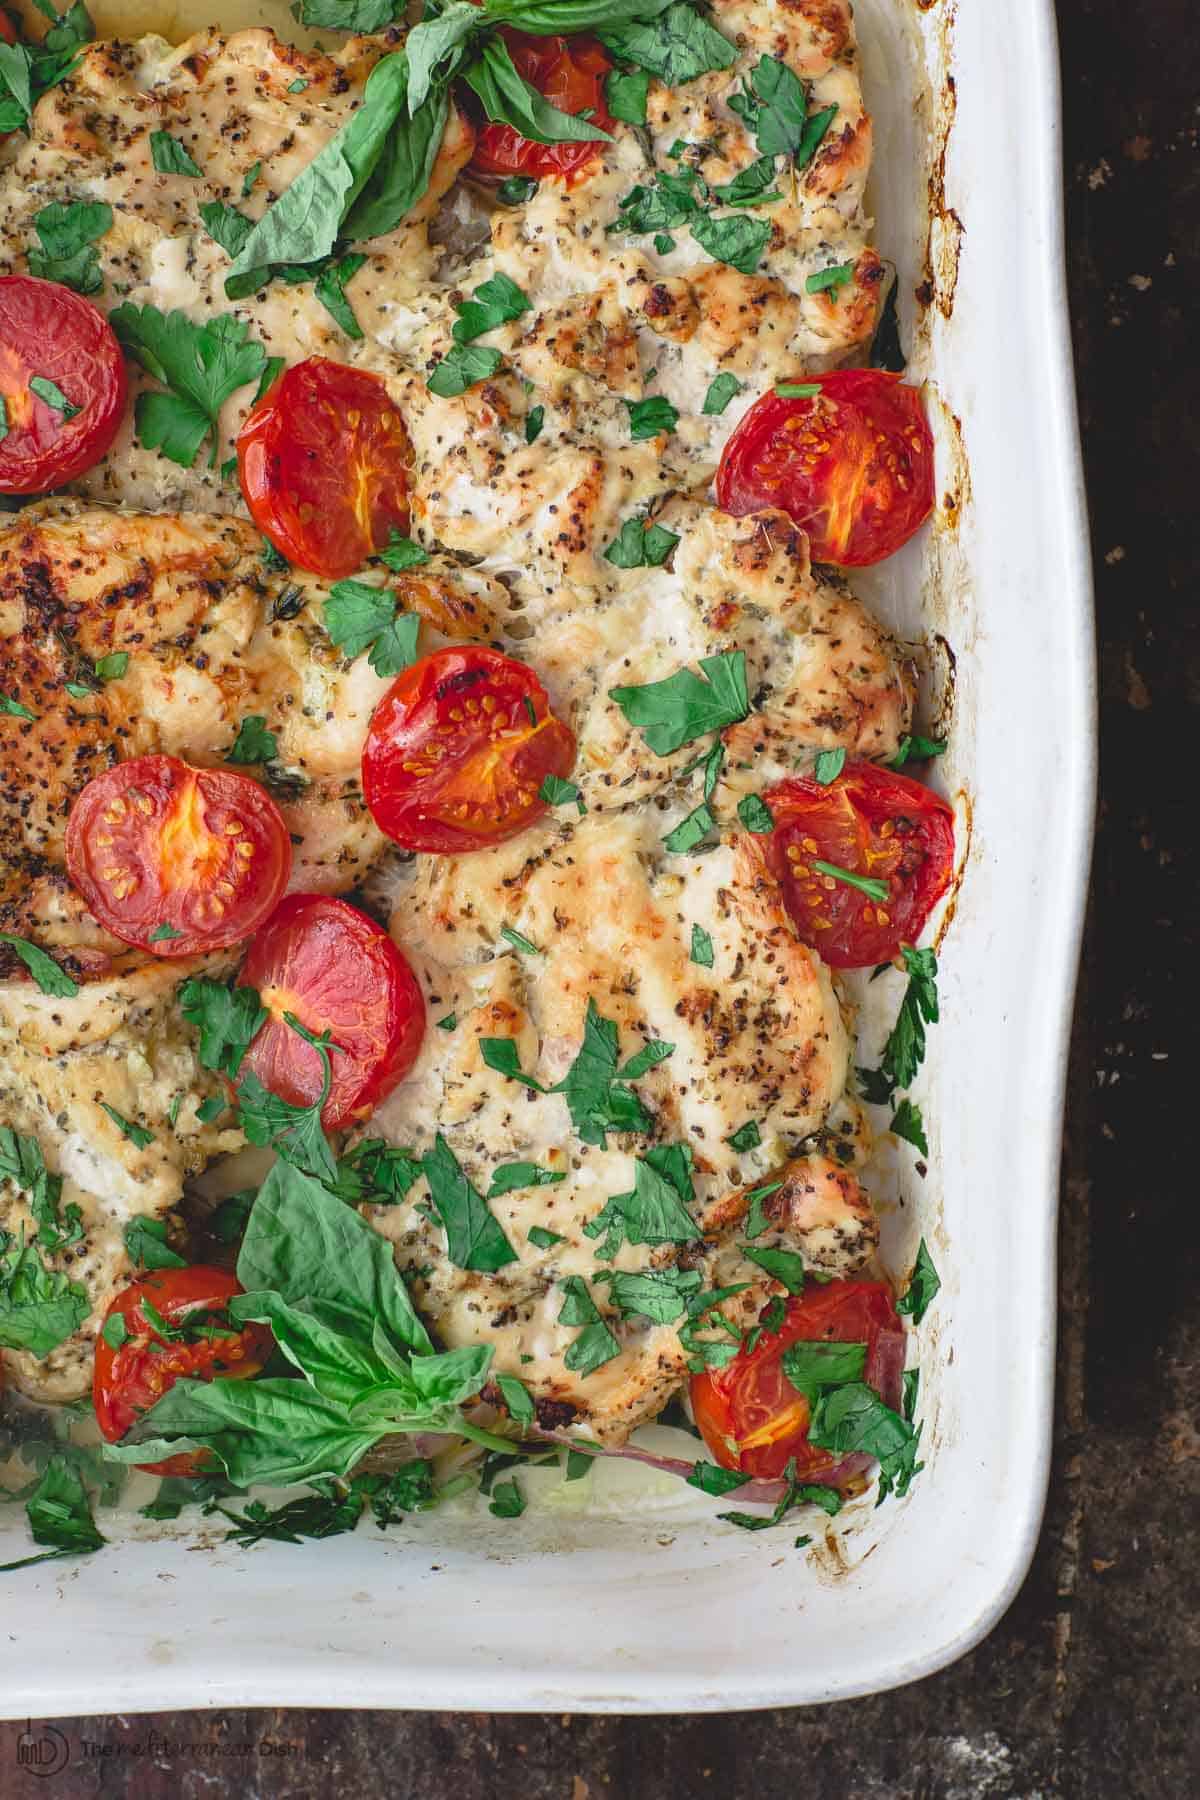 Easy Italian Baked Chicken Recipe With Video The Mediterranean Dish,Is Soy Milk Healthy Or Not